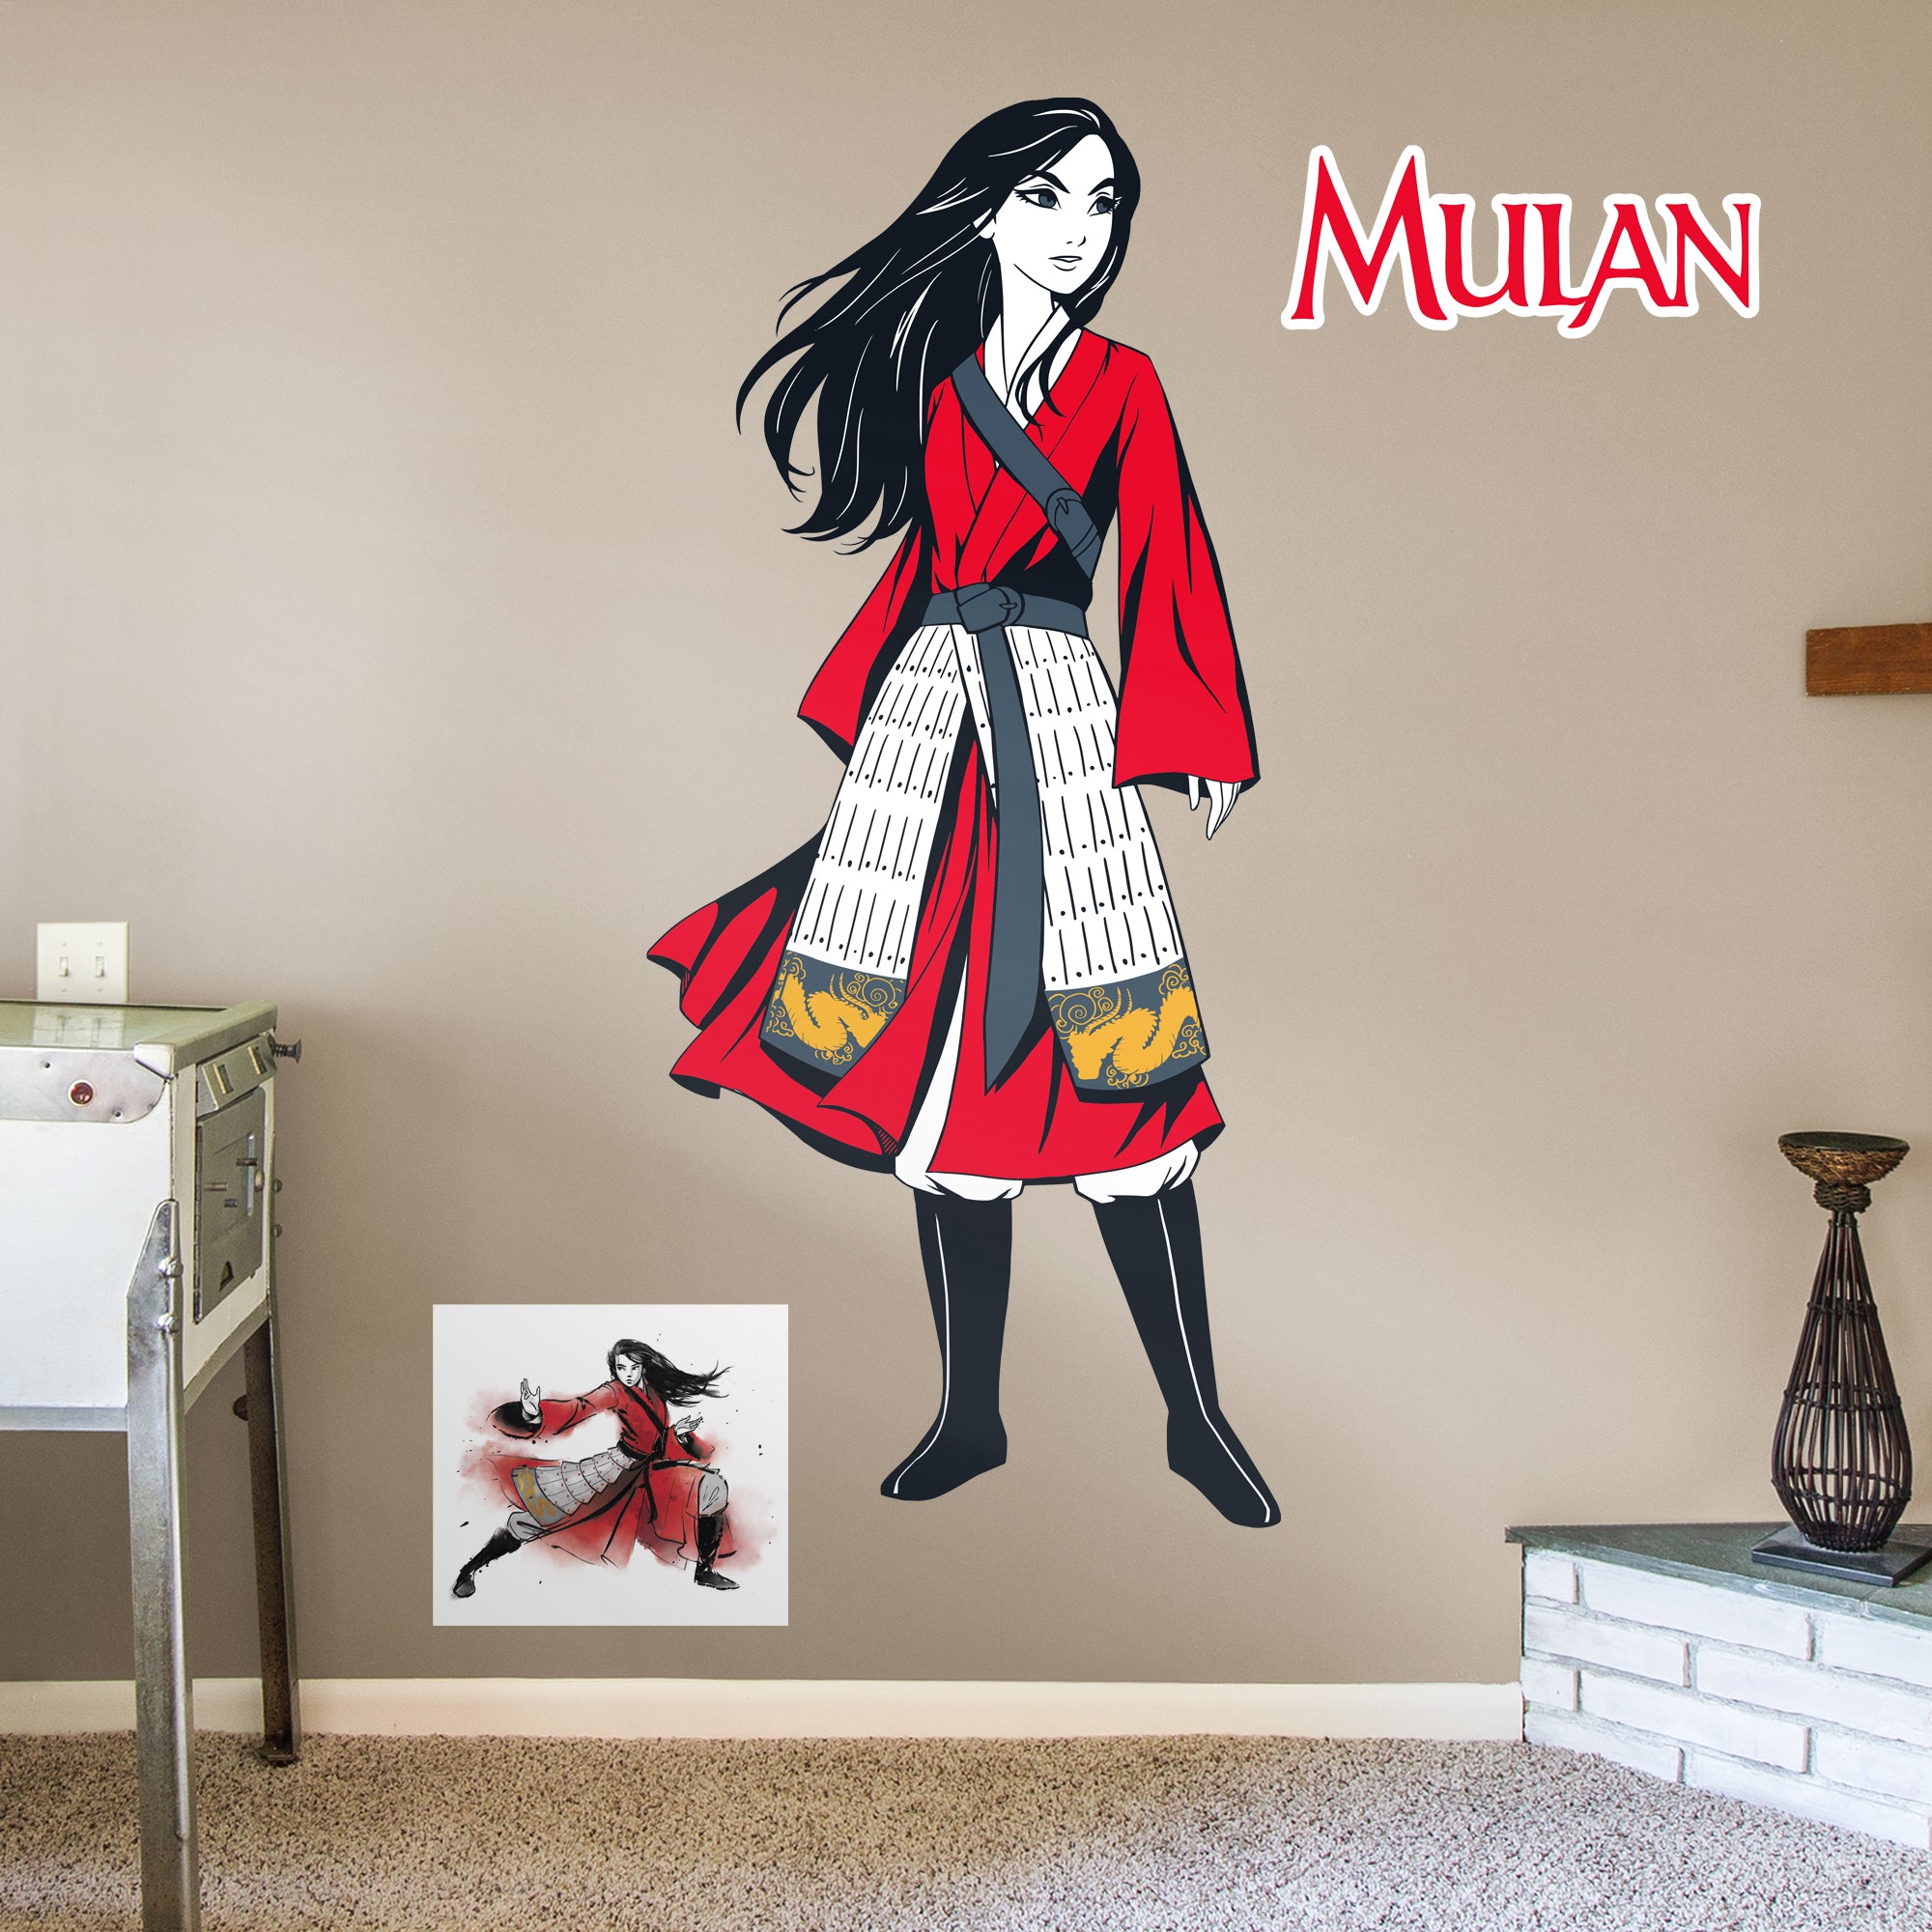 Mulan - Illustrated-Officially Licensed Disney Removable Wall Decal Life Size + 2 Decals by Fathead | Vinyl